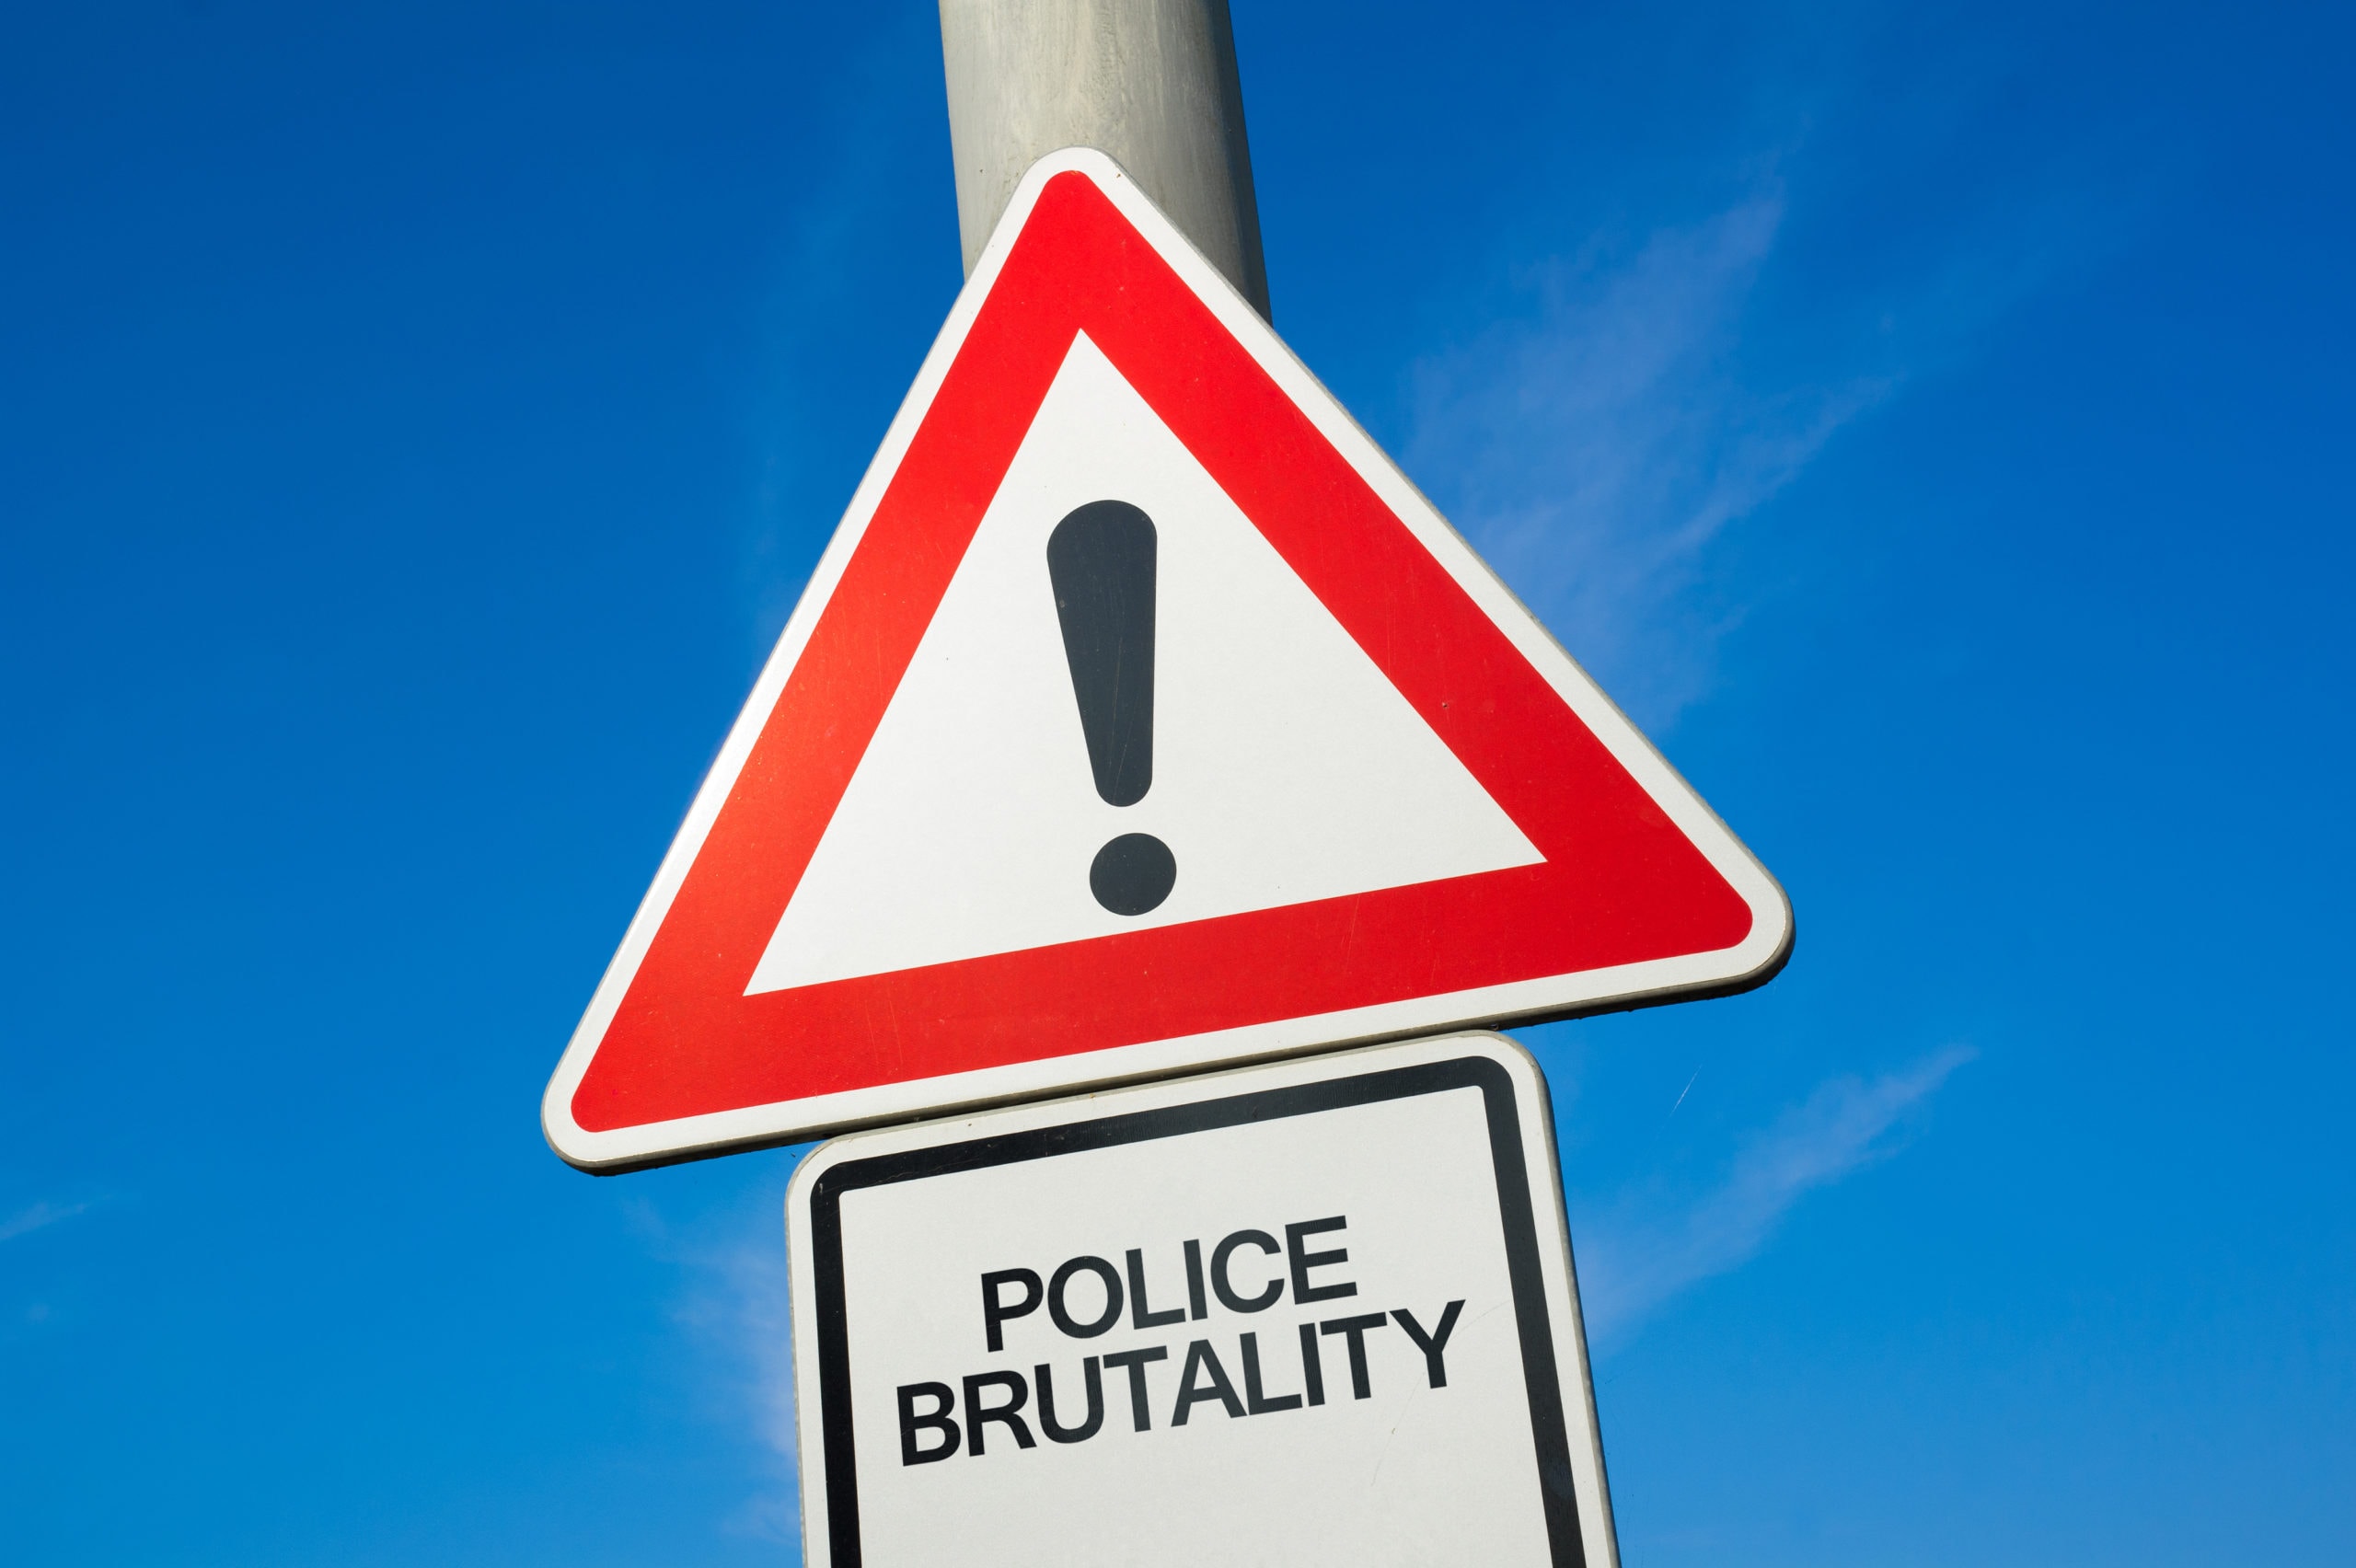 Police brutality - traffic sign with exclamation mark to alert, warn caution - precaution and warning of violent, harmful and repressive attack made by policemen and cops